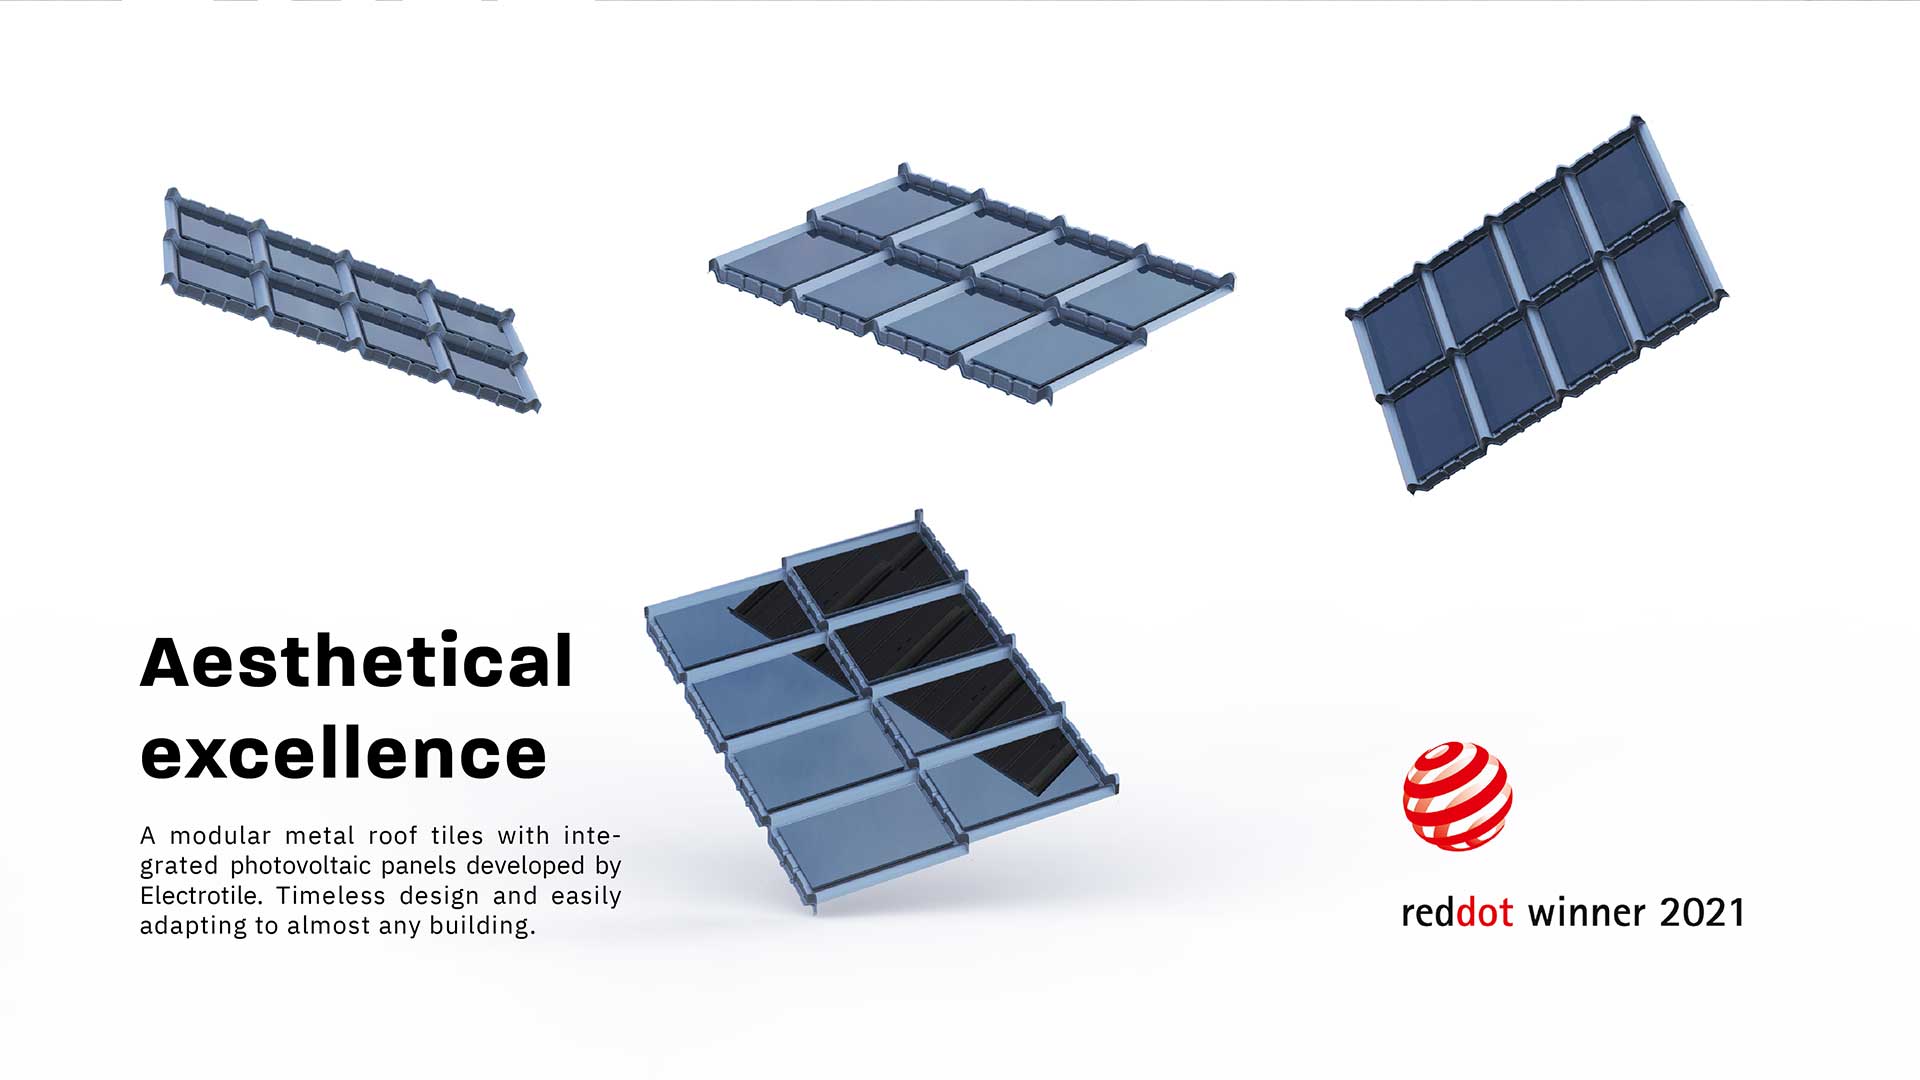 Aesthetical excellence - A  modular metal roof tiles with integrated photovoltaic panels developed by Electrotile. Timeless design and easily adapting to almost any building.